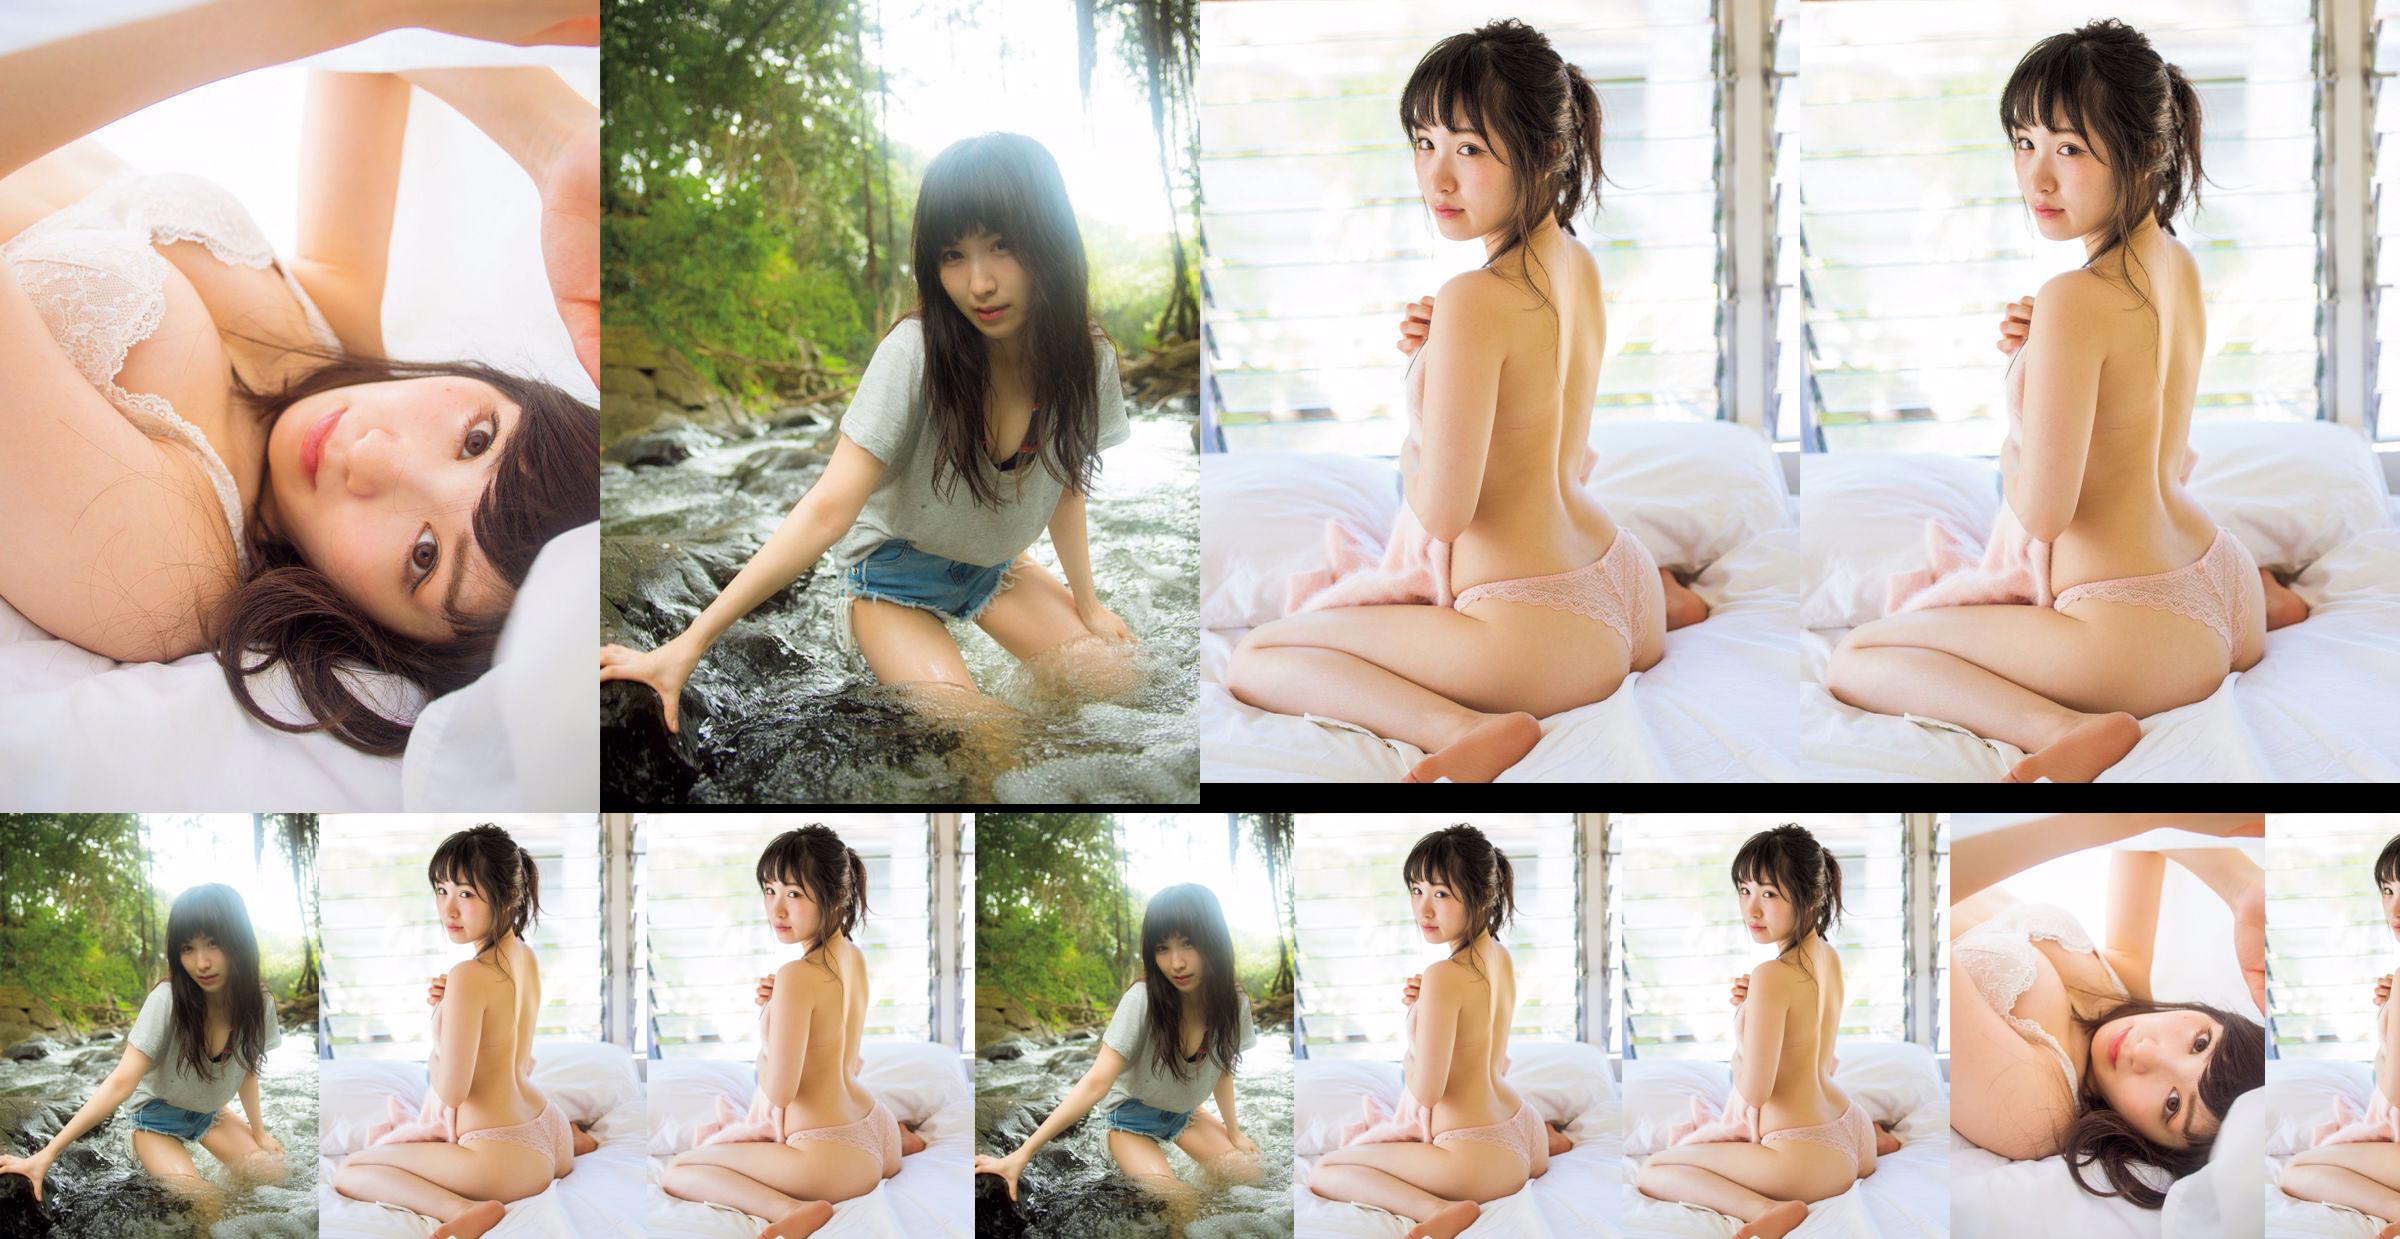 [FRIDAY] "Odagiri Na々 After class プリンセス・「ヒップを见てね」」Photo No.ab34f1 Page 3